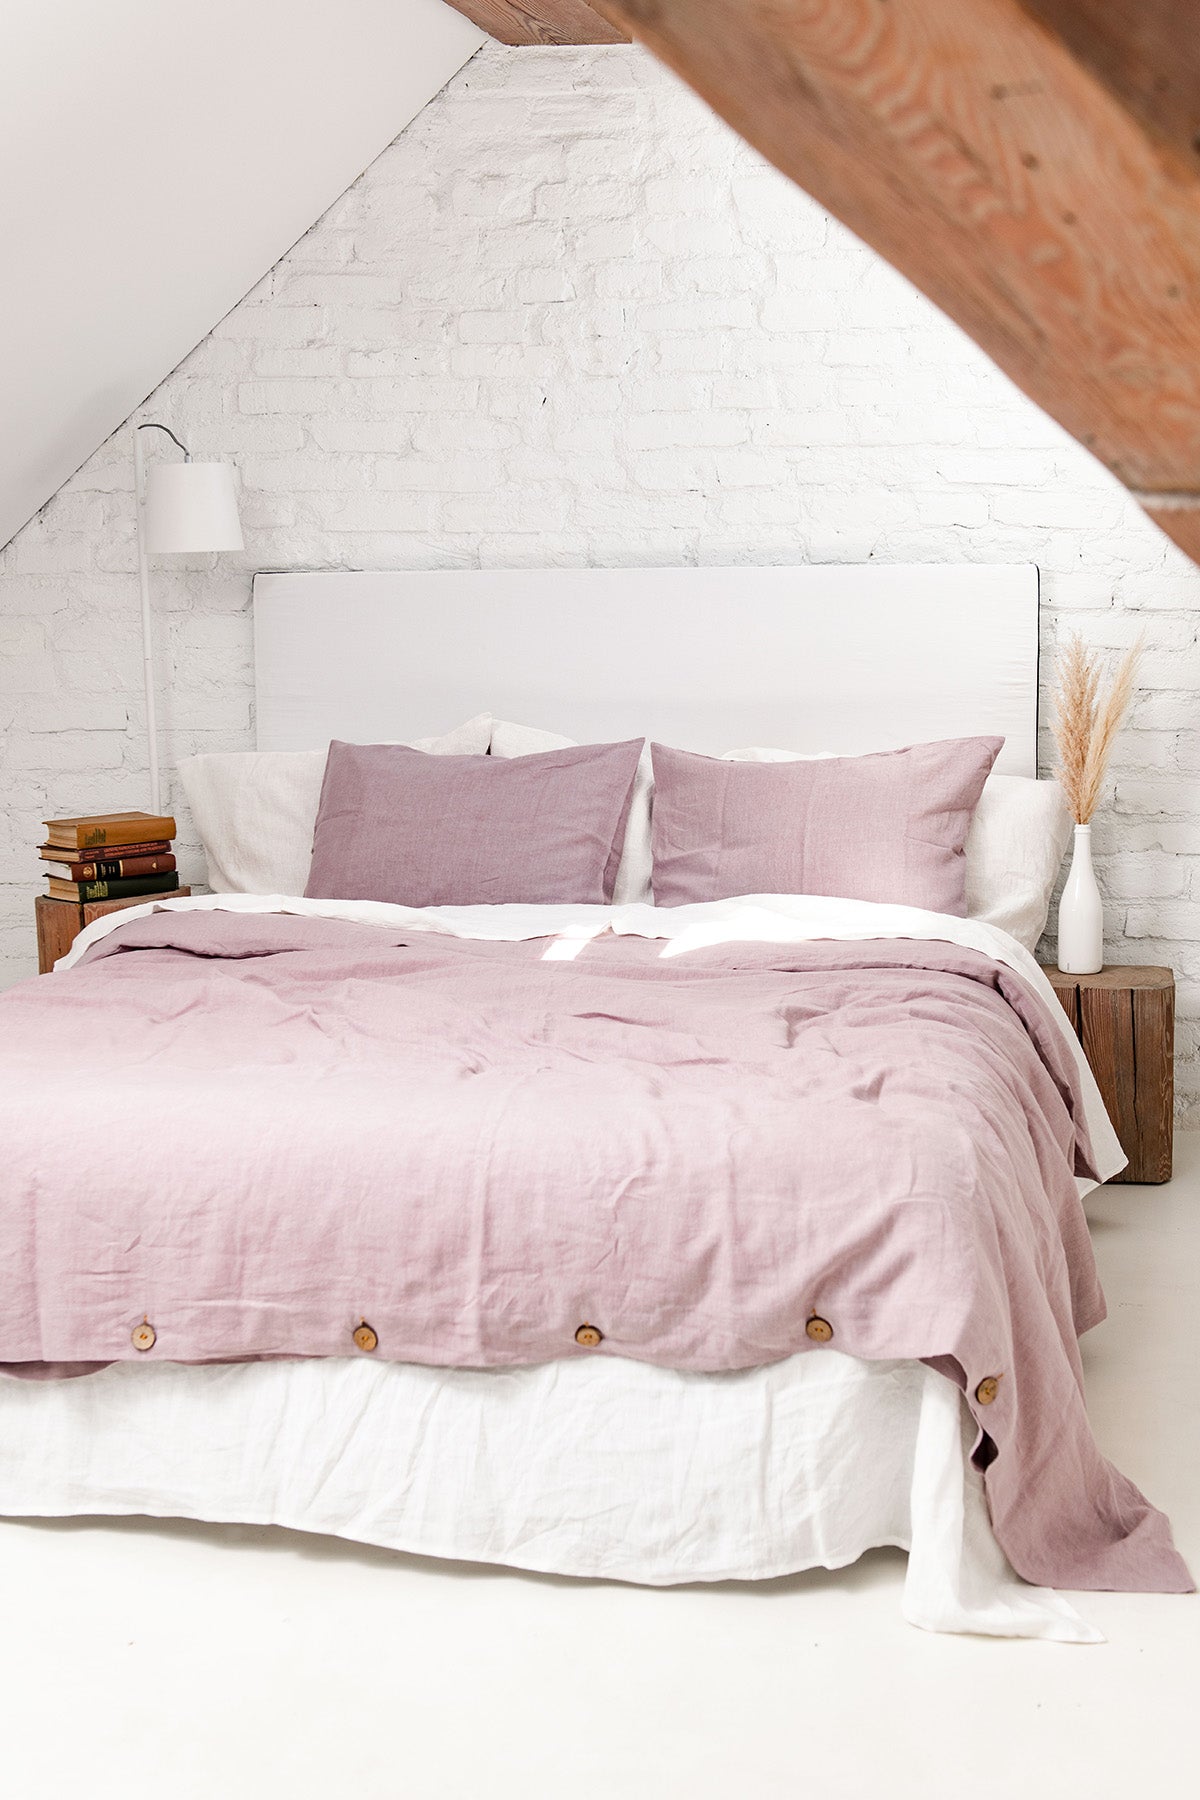 Undone Bed With Dusty Rose Linen Duvet Cover By AmourlInen